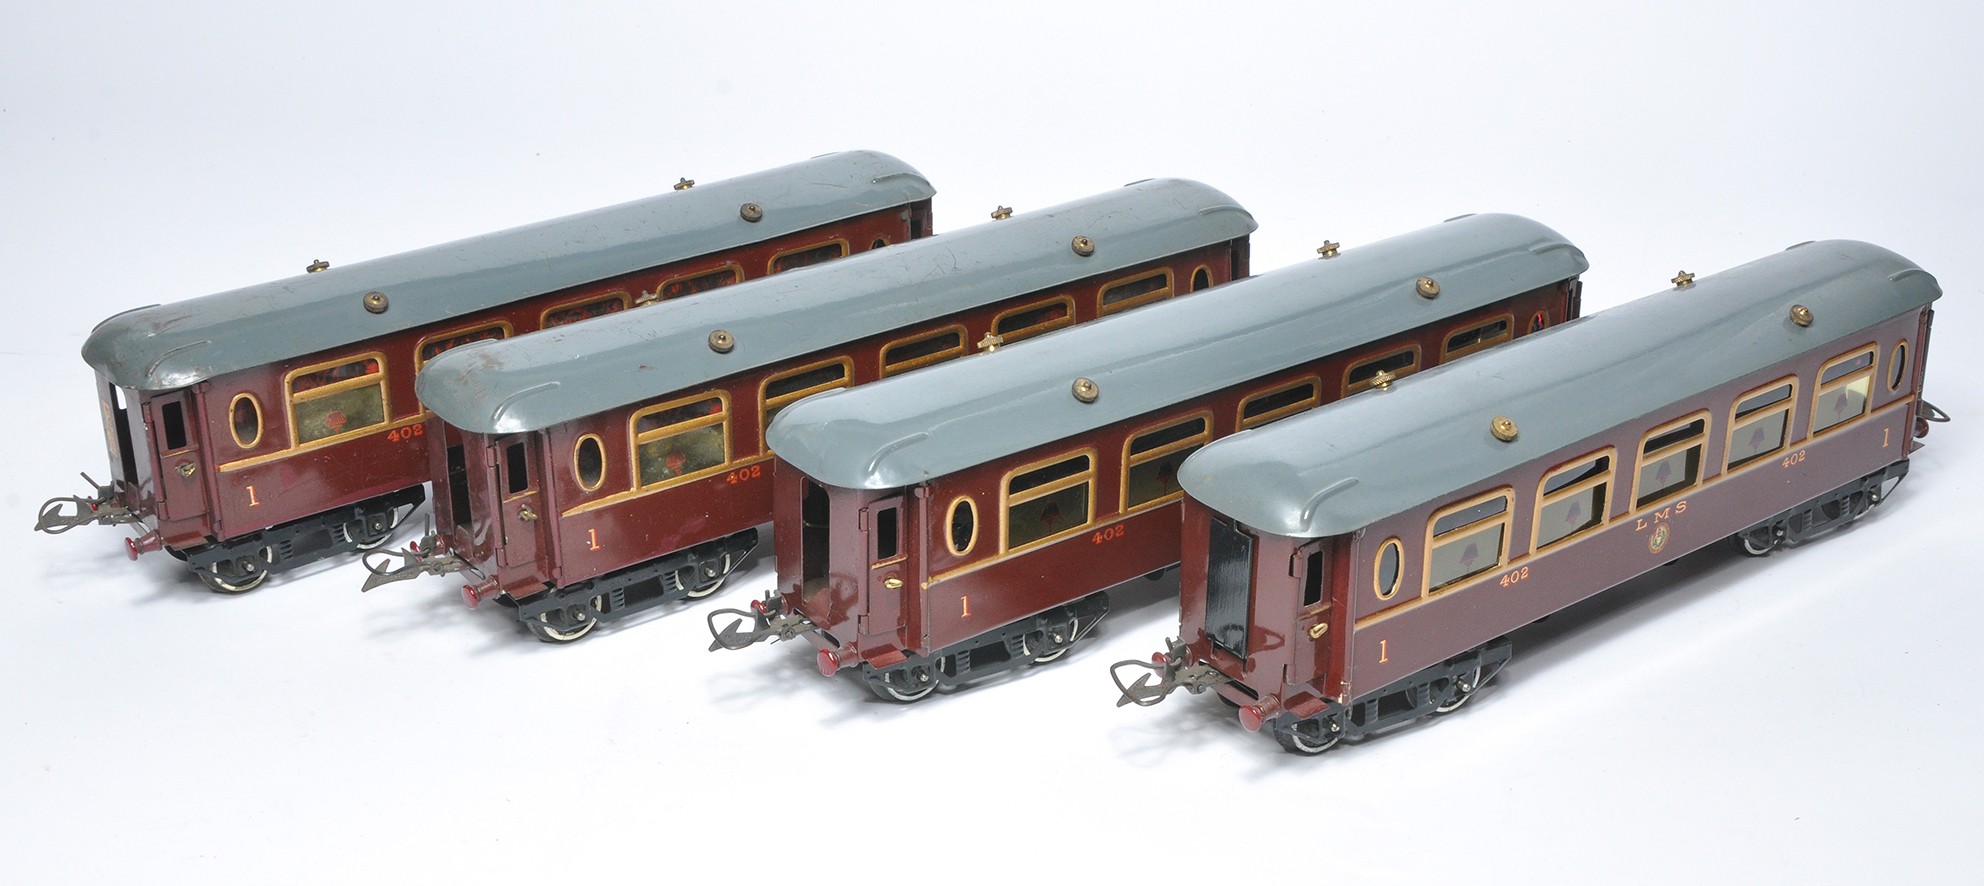 Hornby O Gauge Model Railway comprising four LMS Coaches as shown. Generally display good to very